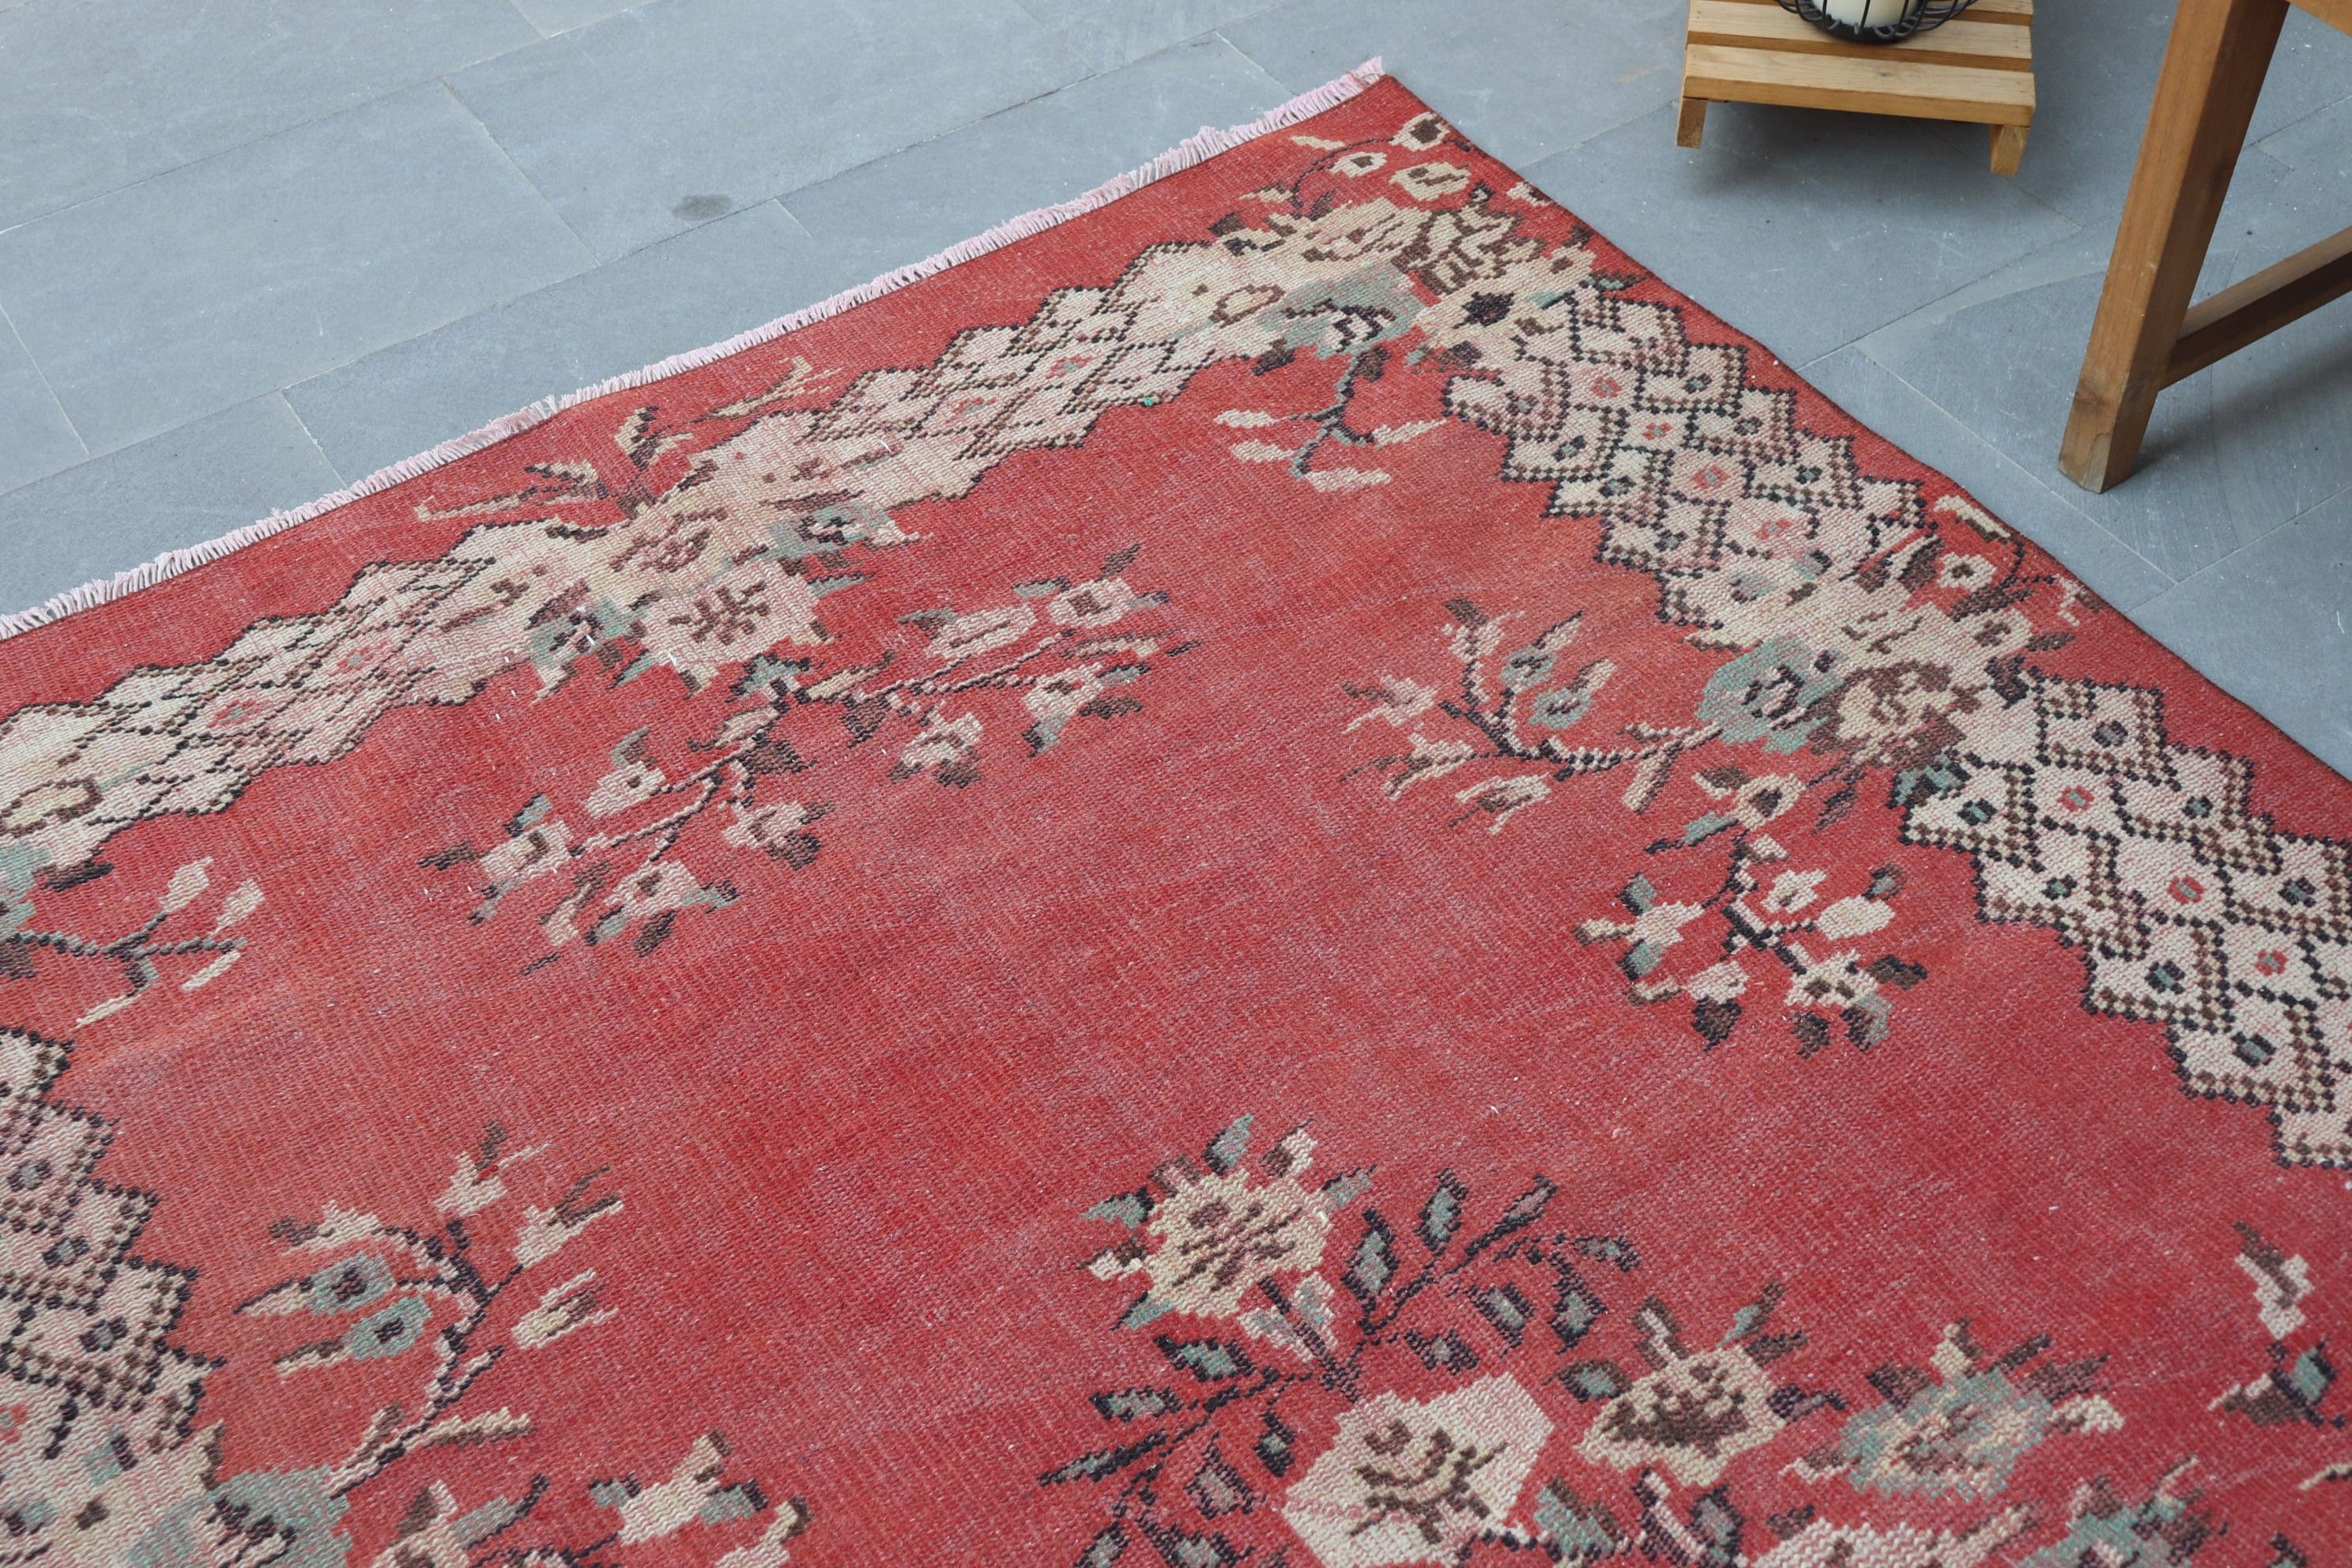 Antique Rugs, Floor Rugs, Rugs for Area, 4.7x7.9 ft Area Rugs, Red Anatolian Rugs, Turkish Rug, Vintage Rugs, Dining Room Rugs, Retro Rug